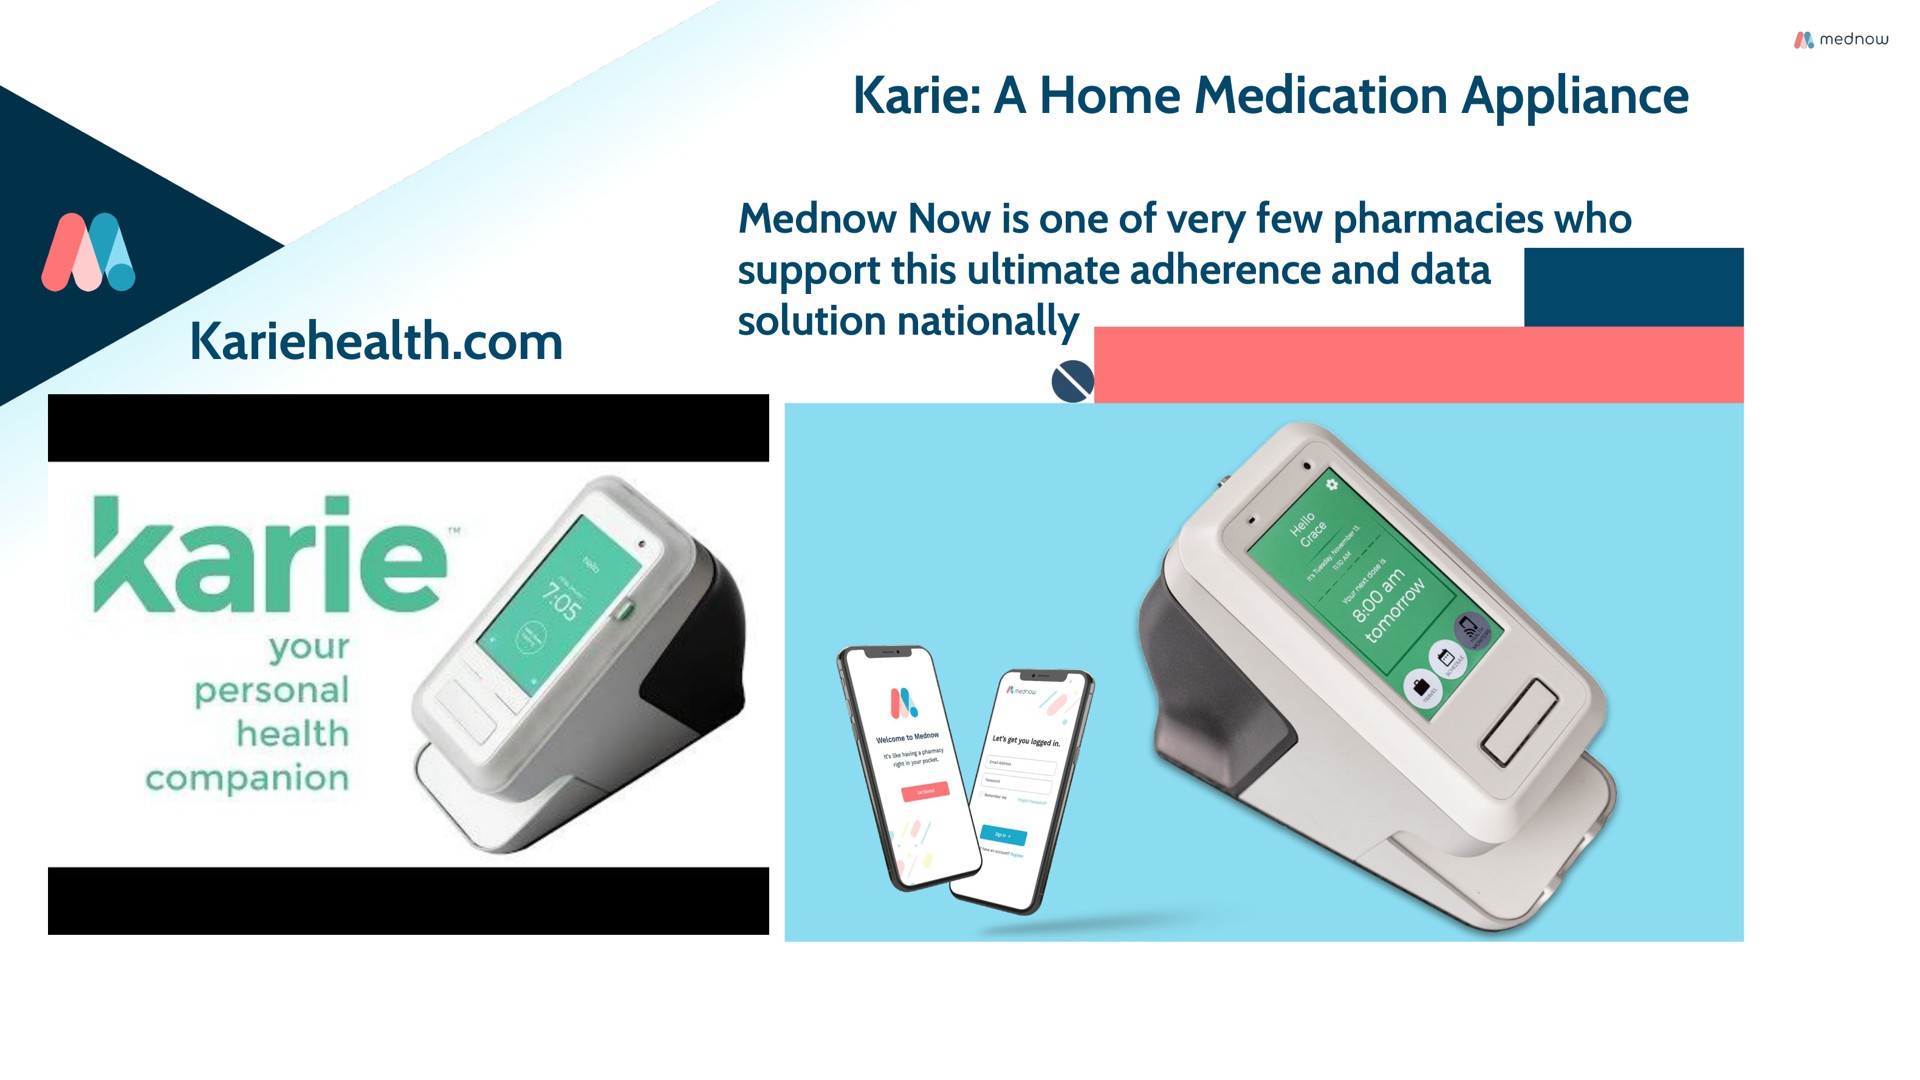 a home medication appliance | Mednow